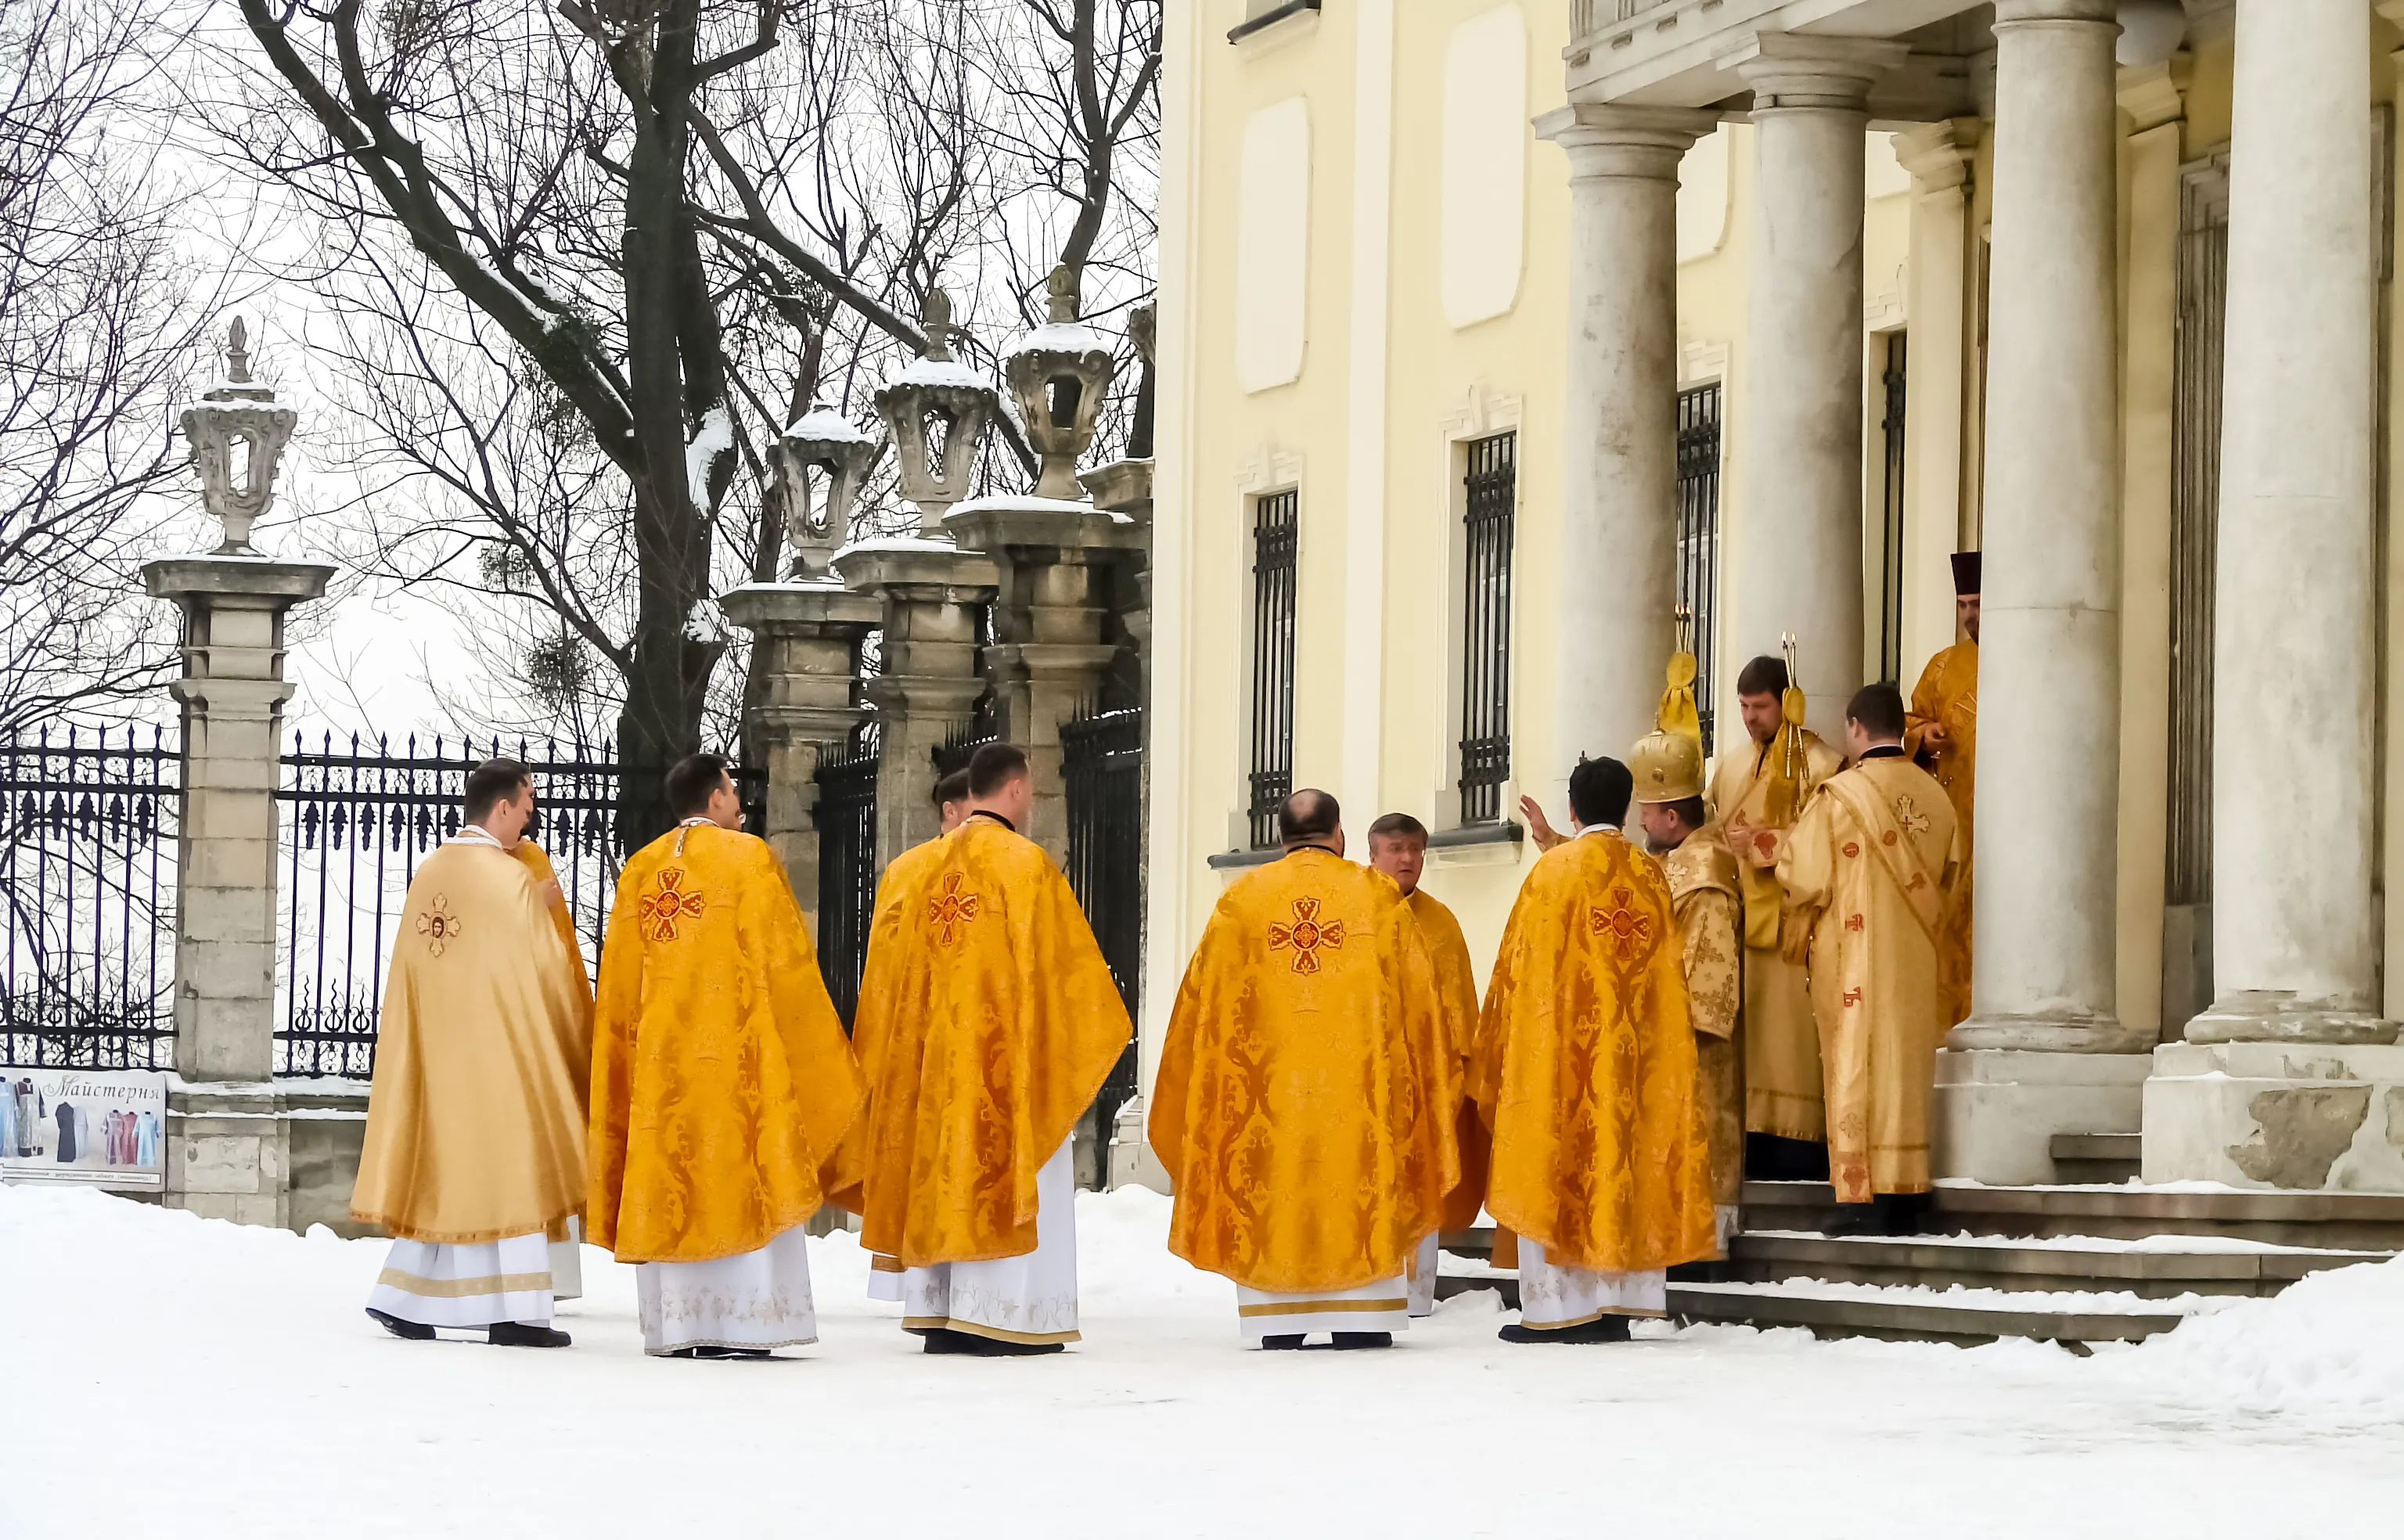 Greek-Catholic priests in traditional bright cassocks in front of a church in Lviv, Ukraine, in 2018. Shutterstock